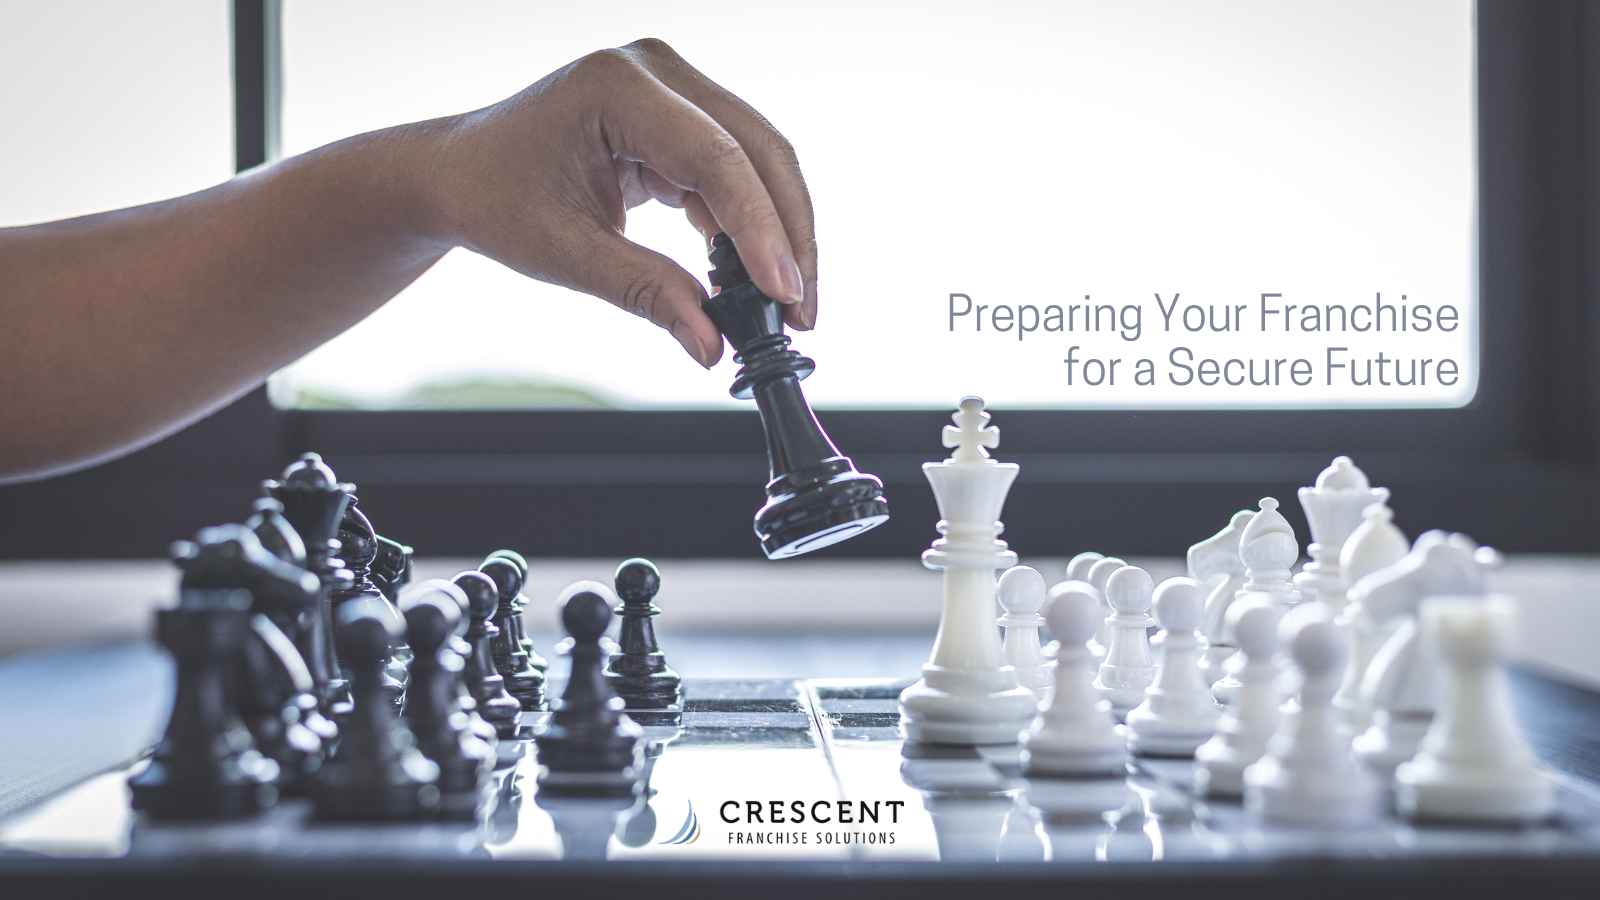 Preparing Your Franchise for a Secure Future at Crescent Franchise Solutions